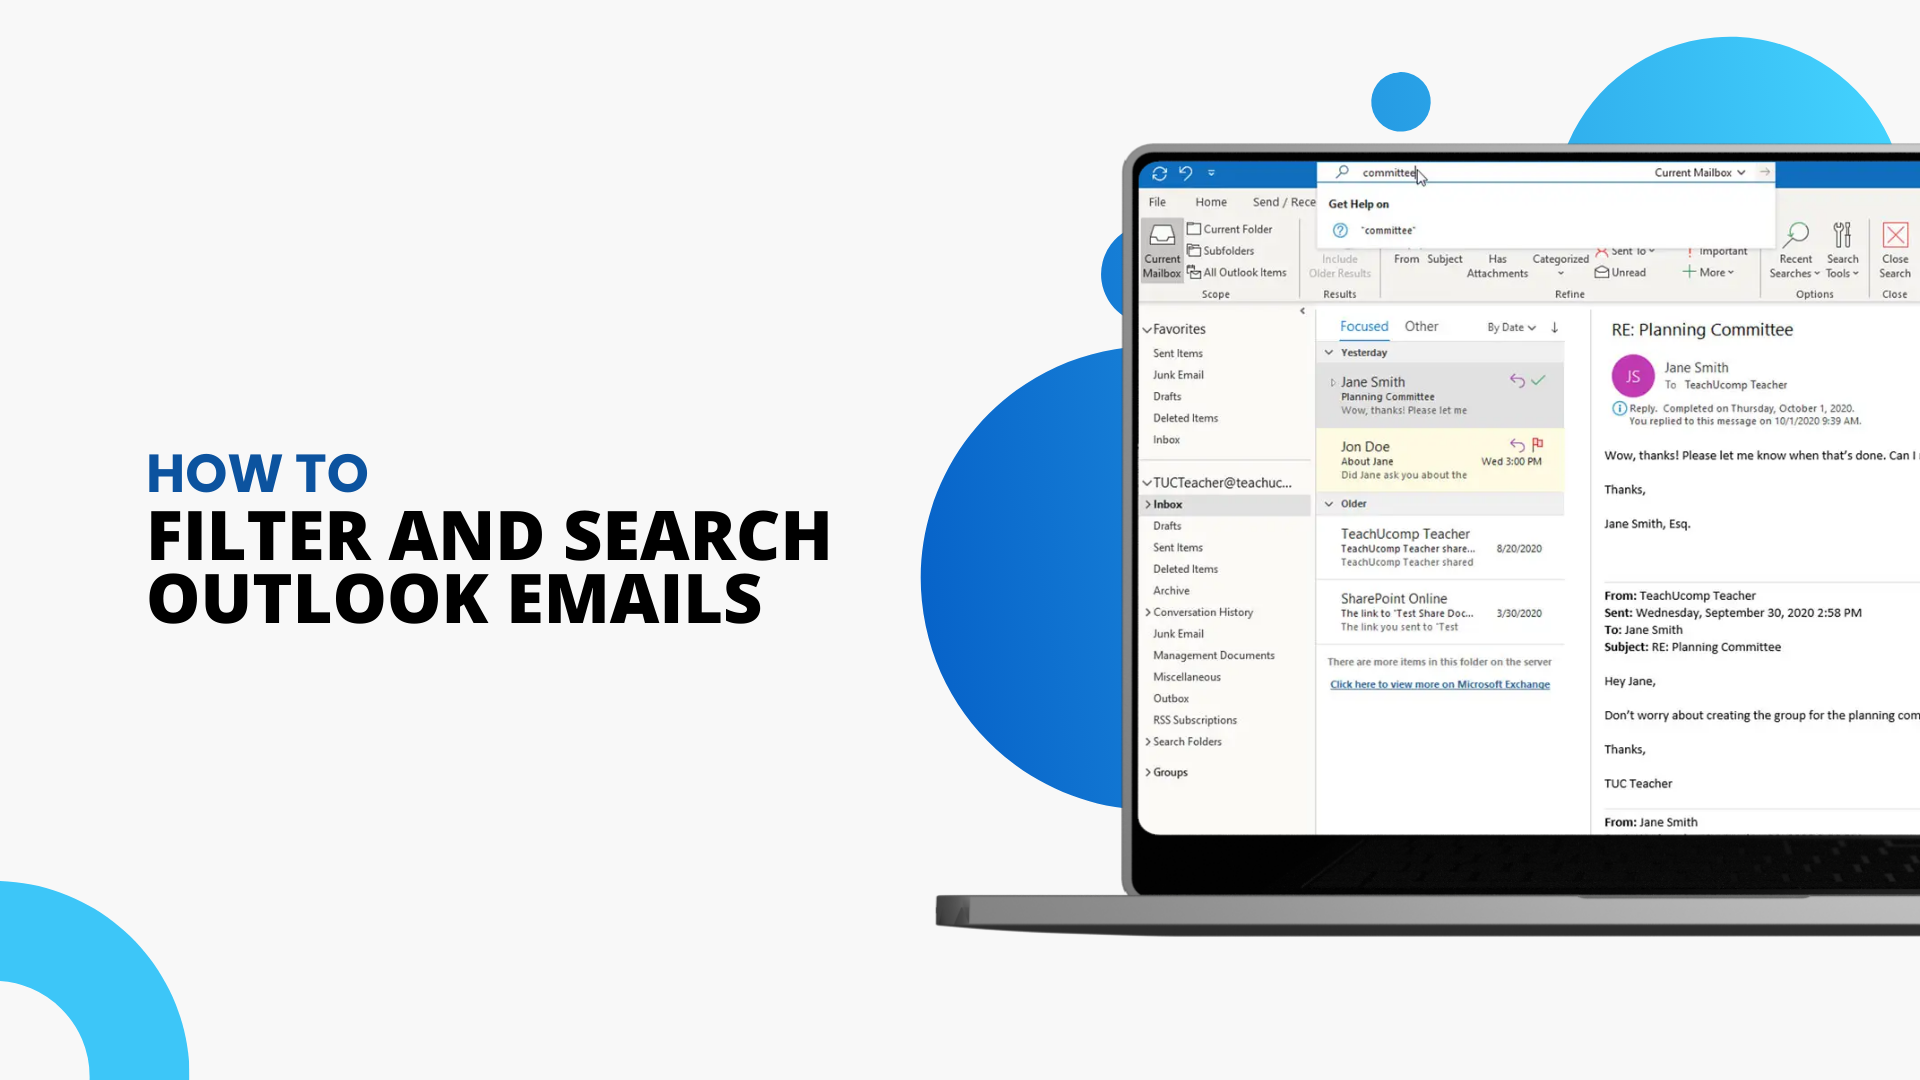 How To Filter and Search for Emails in Outlook